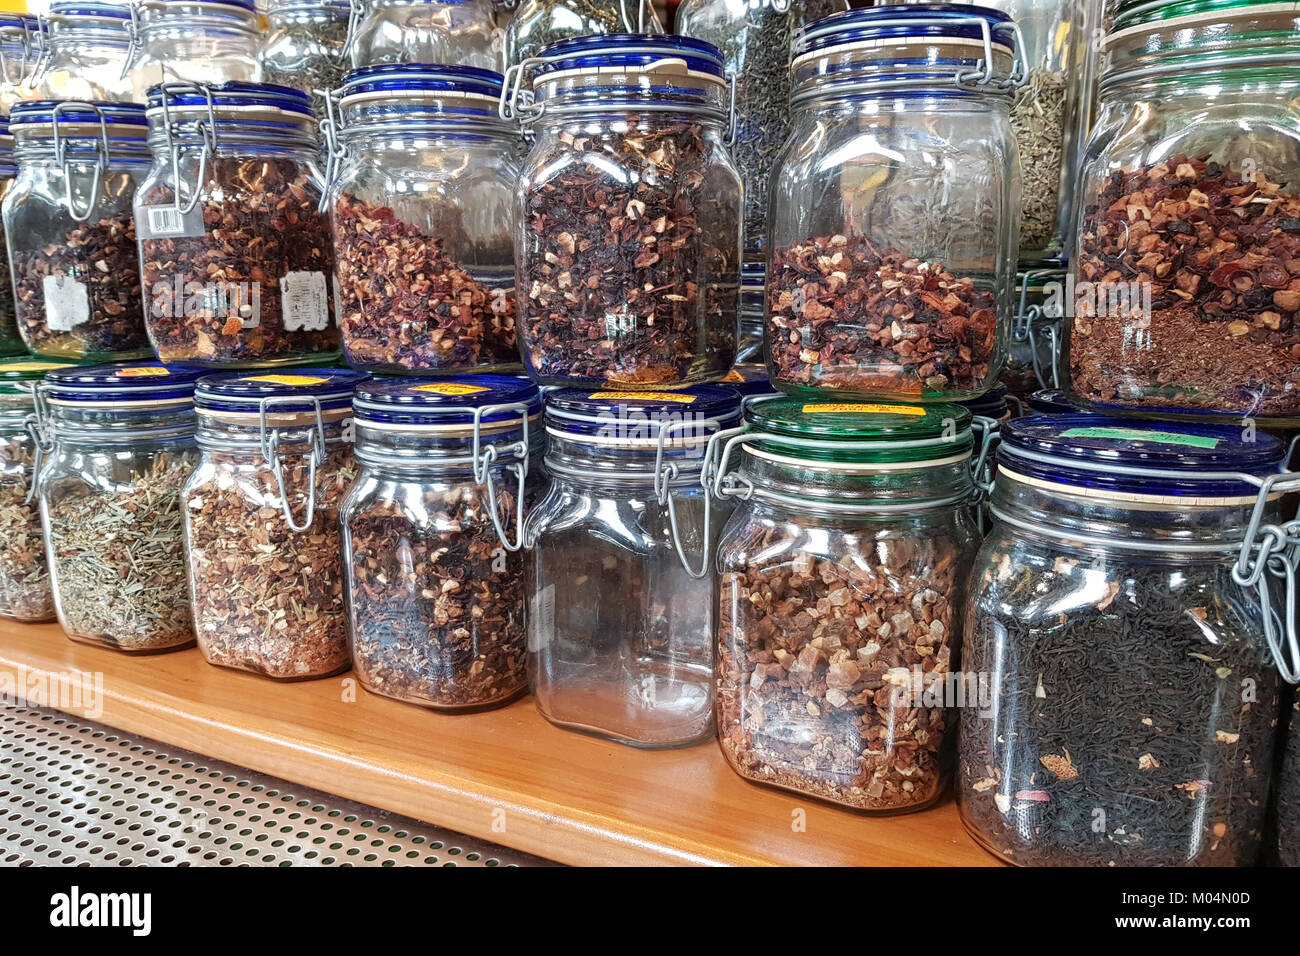 https://c8.alamy.com/comp/M04N0D/a-lot-of-dried-herbs-and-teas-in-jars-on-shelves-in-a-farm-market-M04N0D.jpg